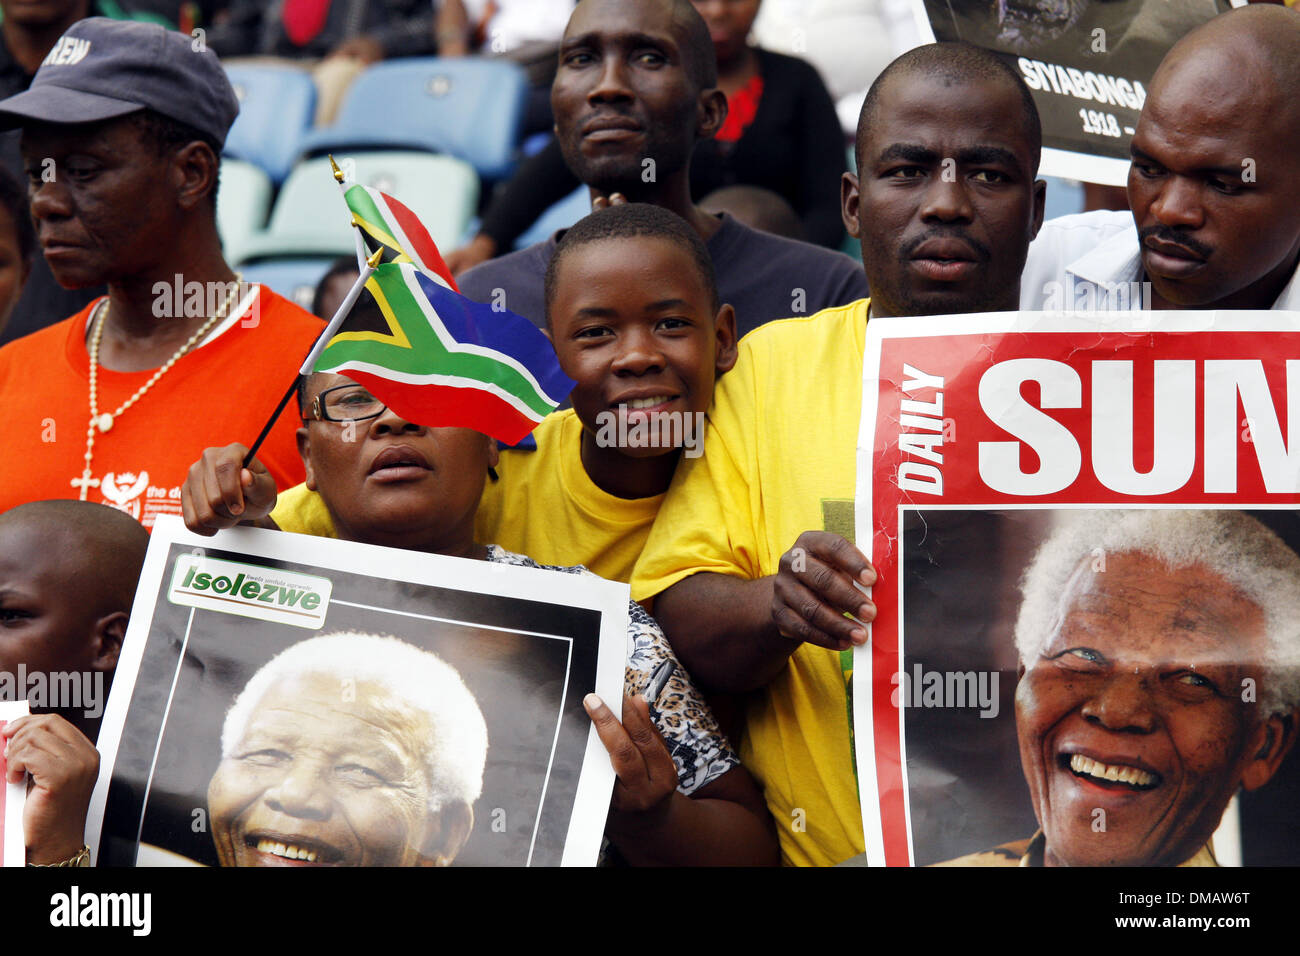 Durban, South Africa. 13th December 2013. Durban's Moses Mabhida stadium was filled with people to celebrate the life of Nelson Mandela in a memorial to the icon who passed away on December 5 at the age of 95. Picture: Giordano Stolley/Alamy Live News Stock Photo